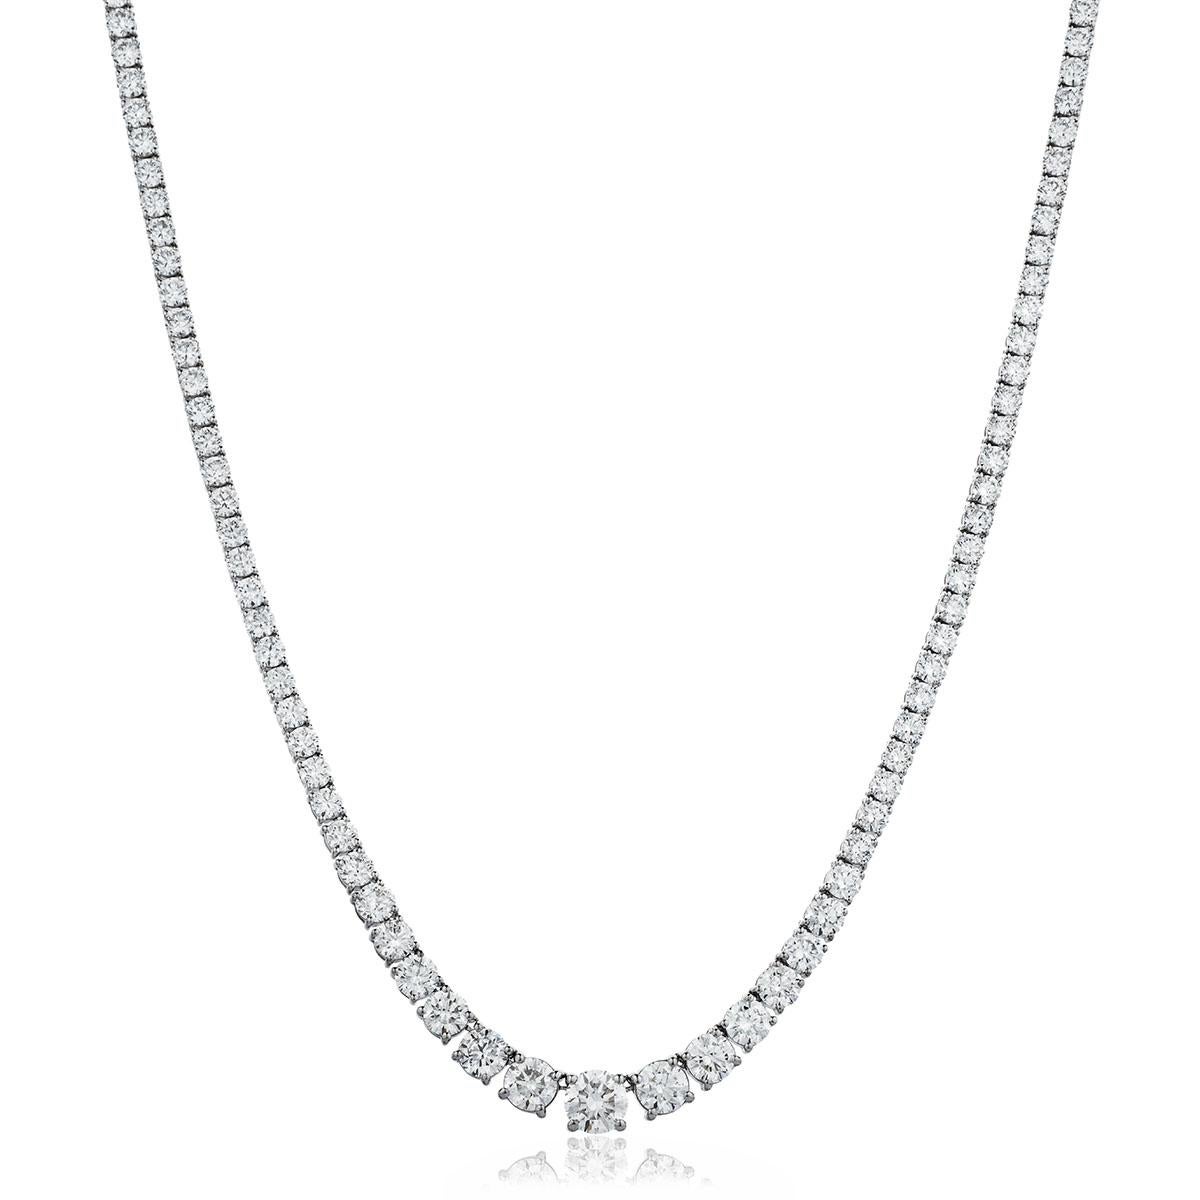 This stunning and impressive Riviera Necklace features large total Diamond weight of 6.65 Carats in beautifully graduated Round Brilliant Cut gems with a sparkly white color G clarity SI1 eye clean. Each stone has a four-claw setting with open